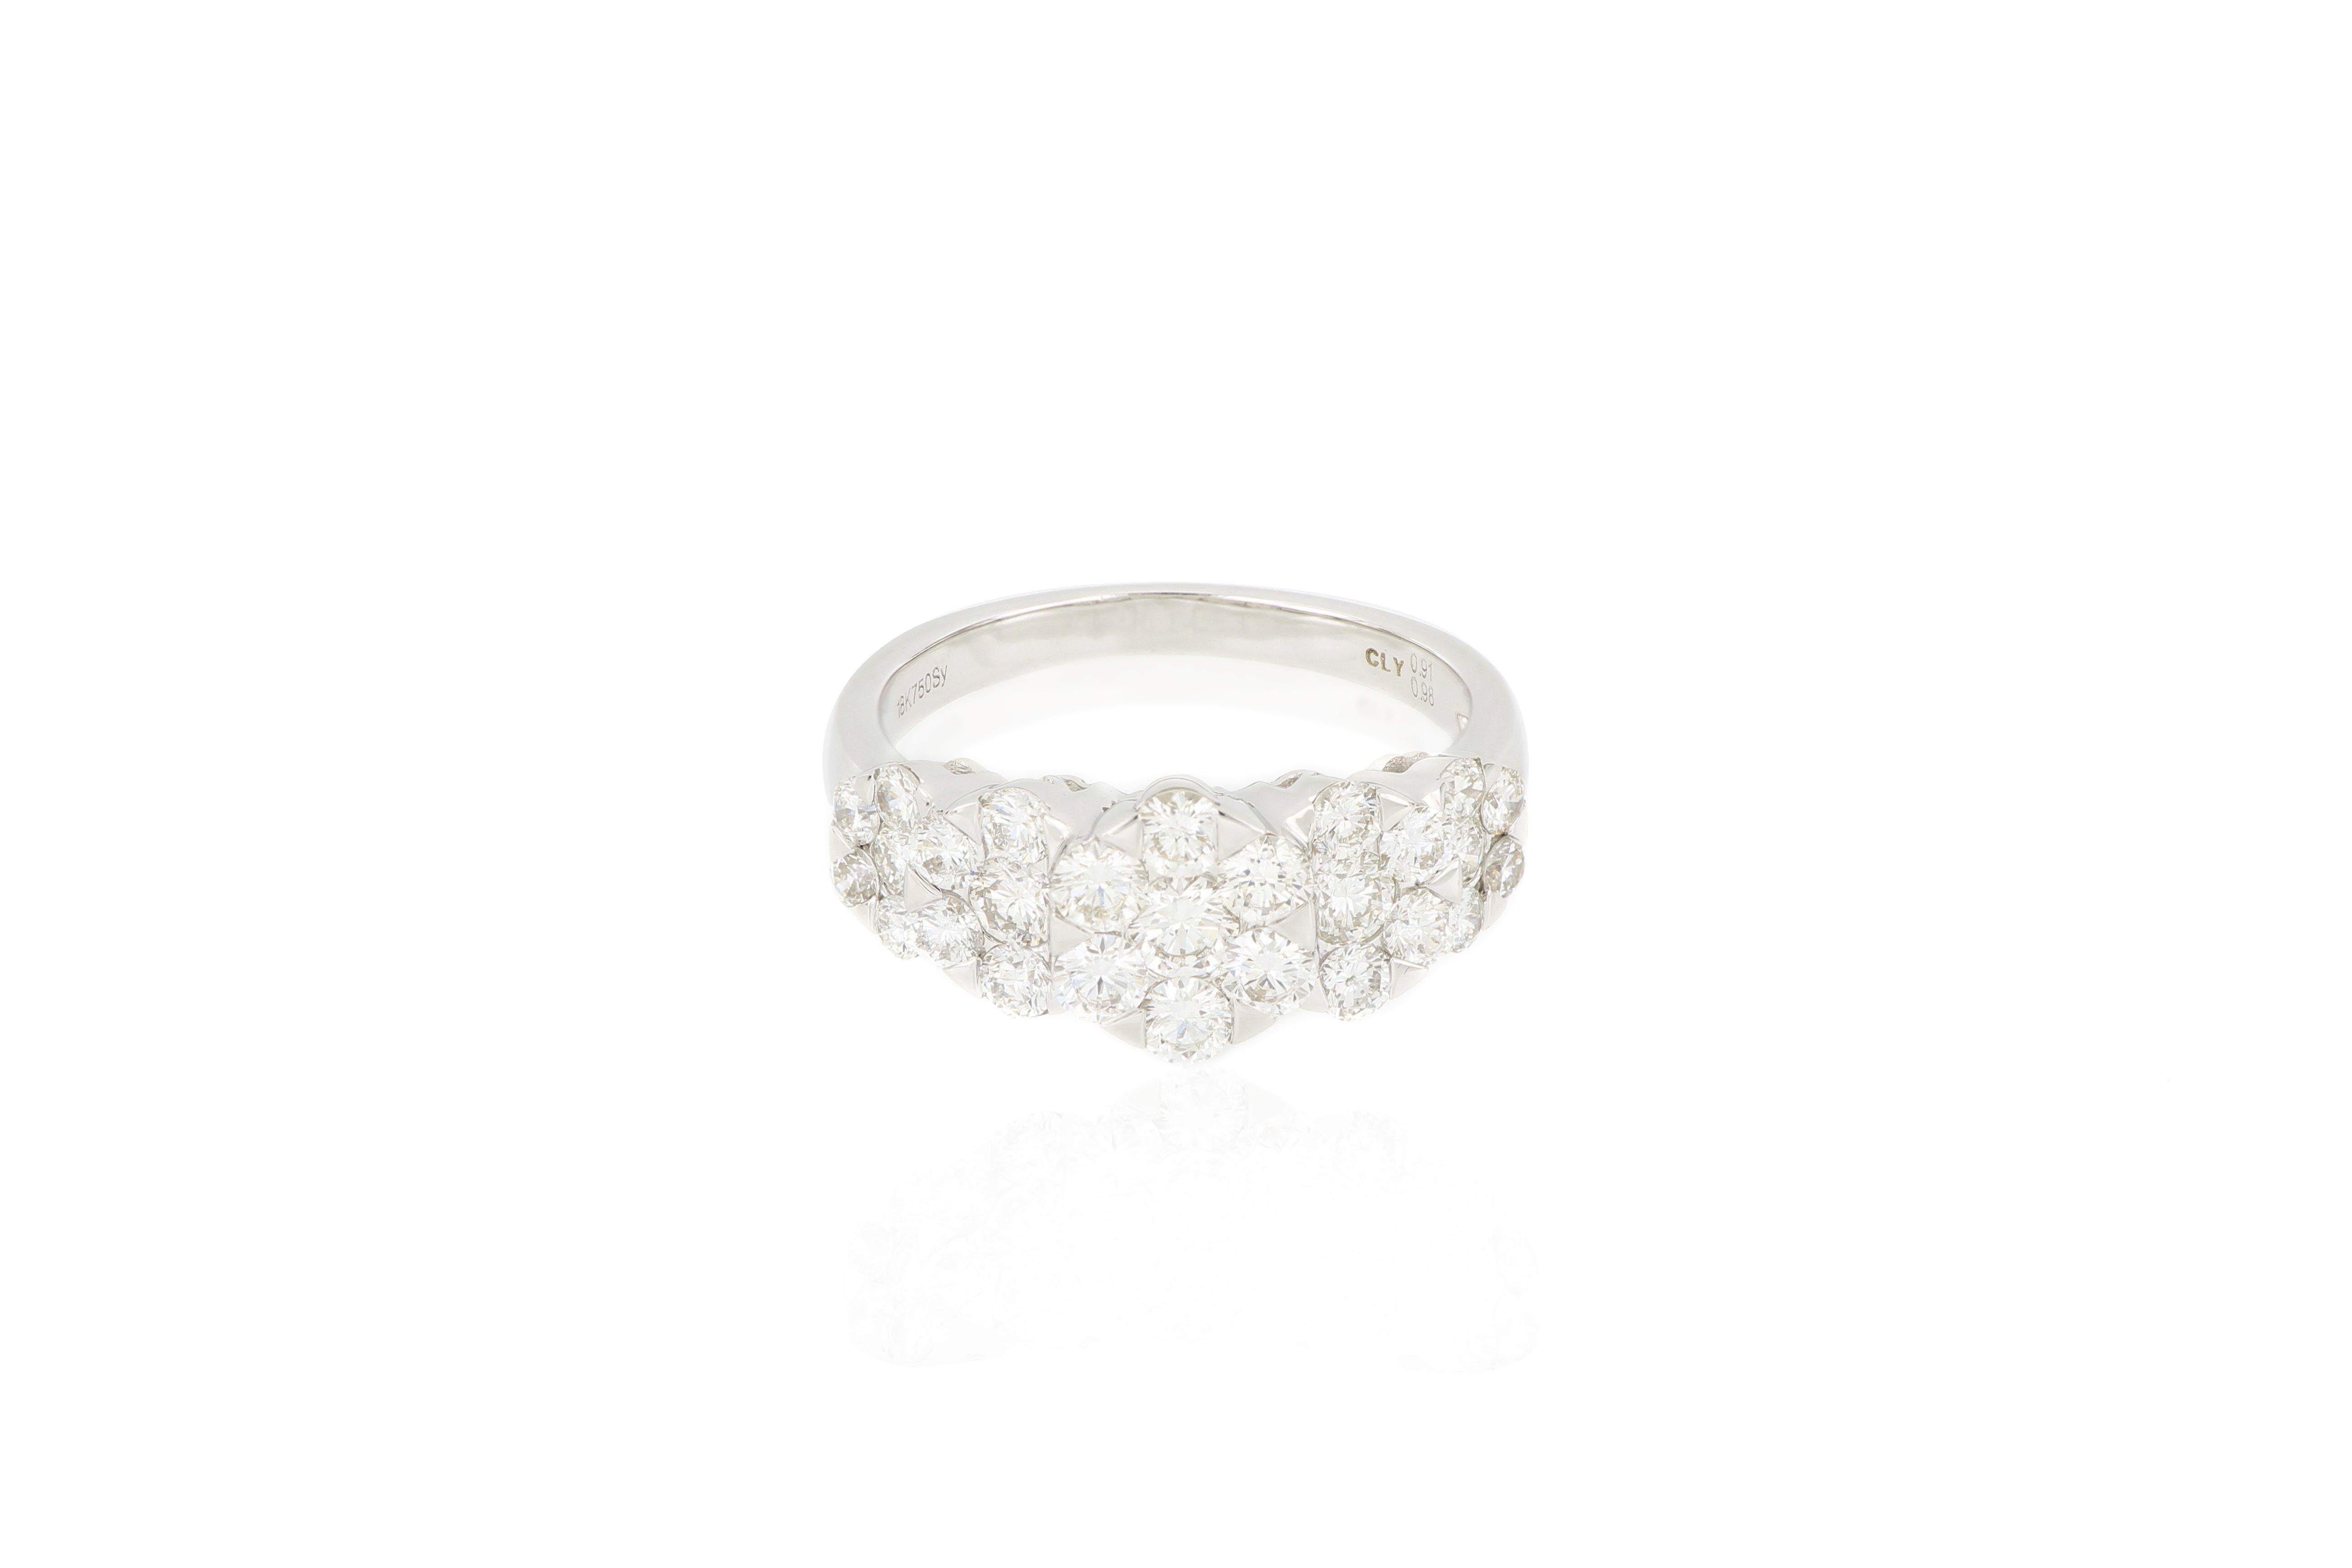 A stylish diamond ring, composed of clusters of brilliant-cut diamonds weighing 1.89 carats, mounted in 18 karat white gold. A very beautiful ring which can be worn for any occasion.
O’Che 1867 is renowned for its high jewellery collections with